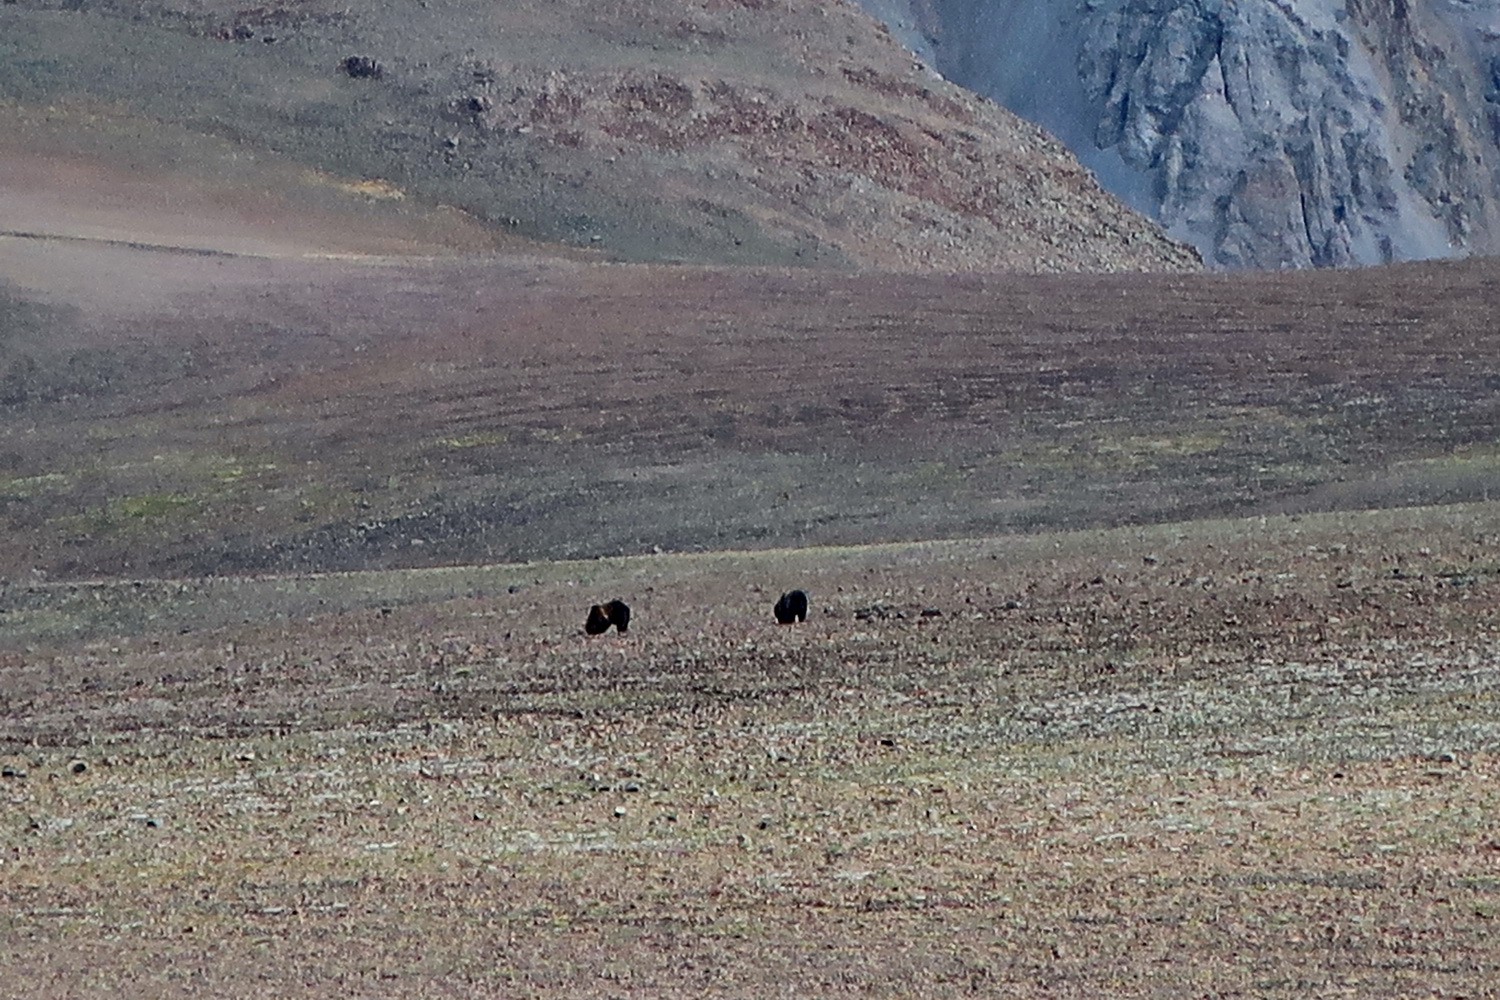 Grizzlies on the high plateau in front of Francs Peak - too many to contine